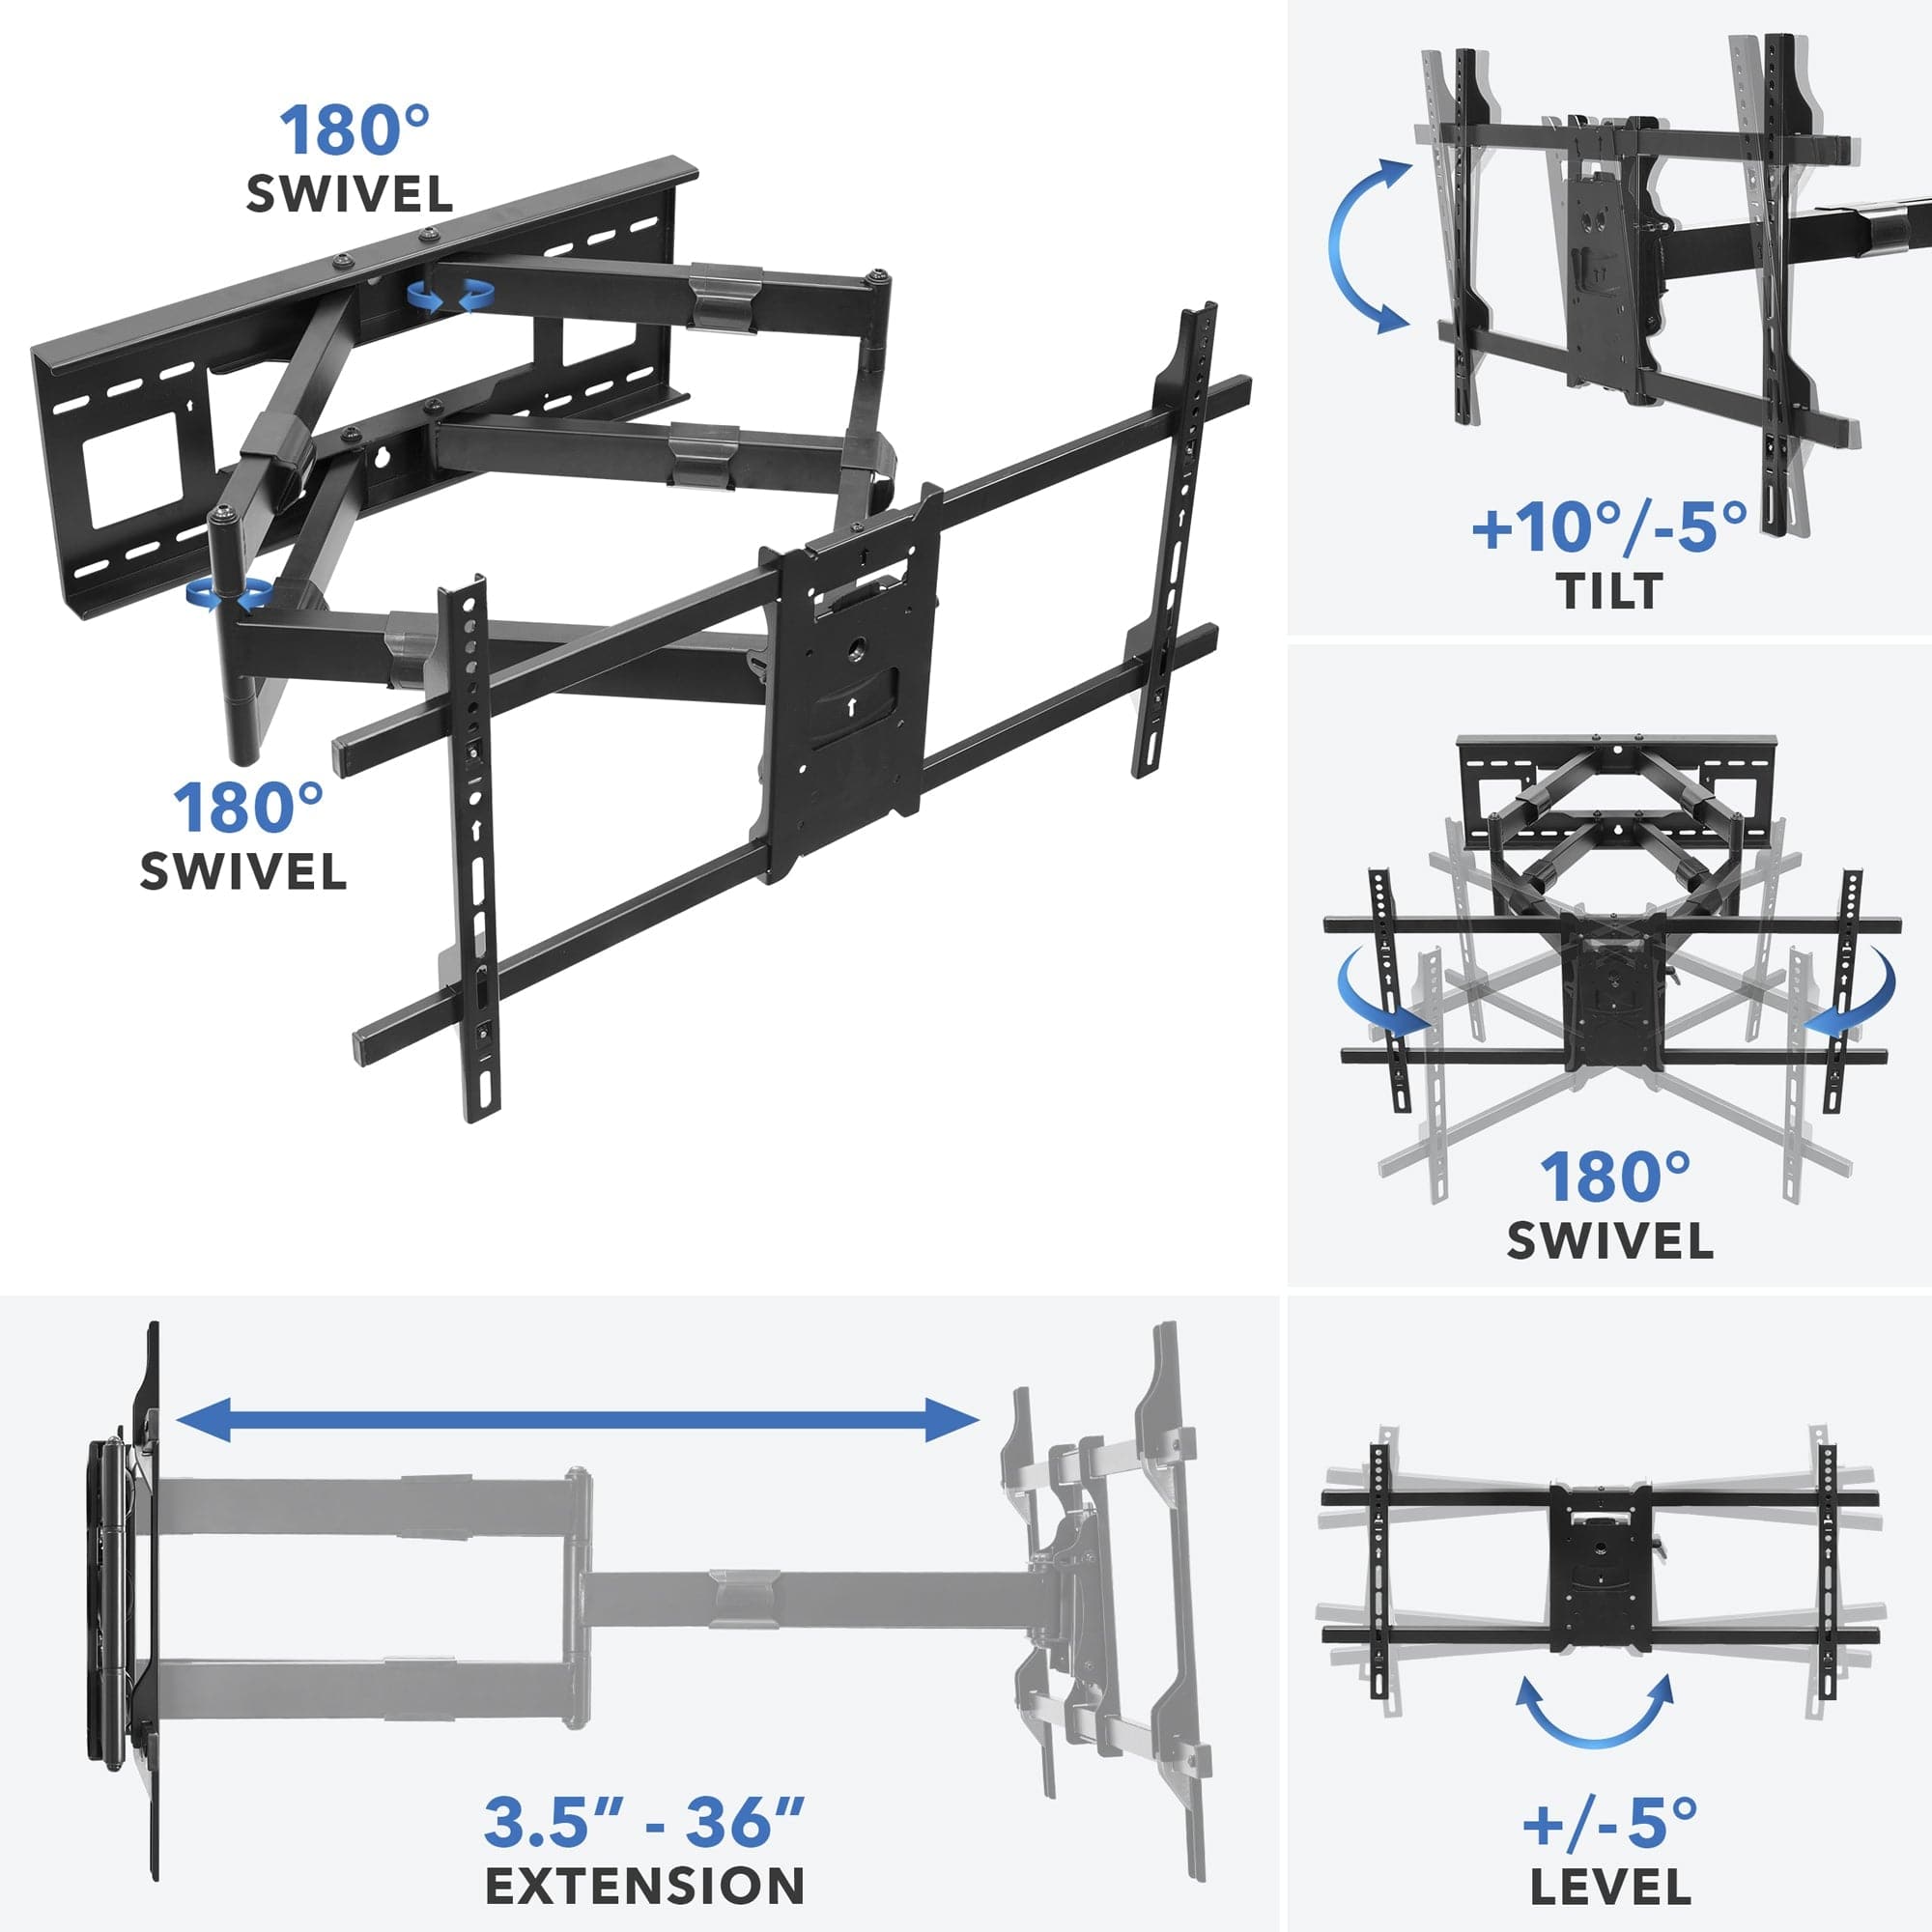 Dual Arm TV Wall Mount with Extra Long Extension - Mount-It!